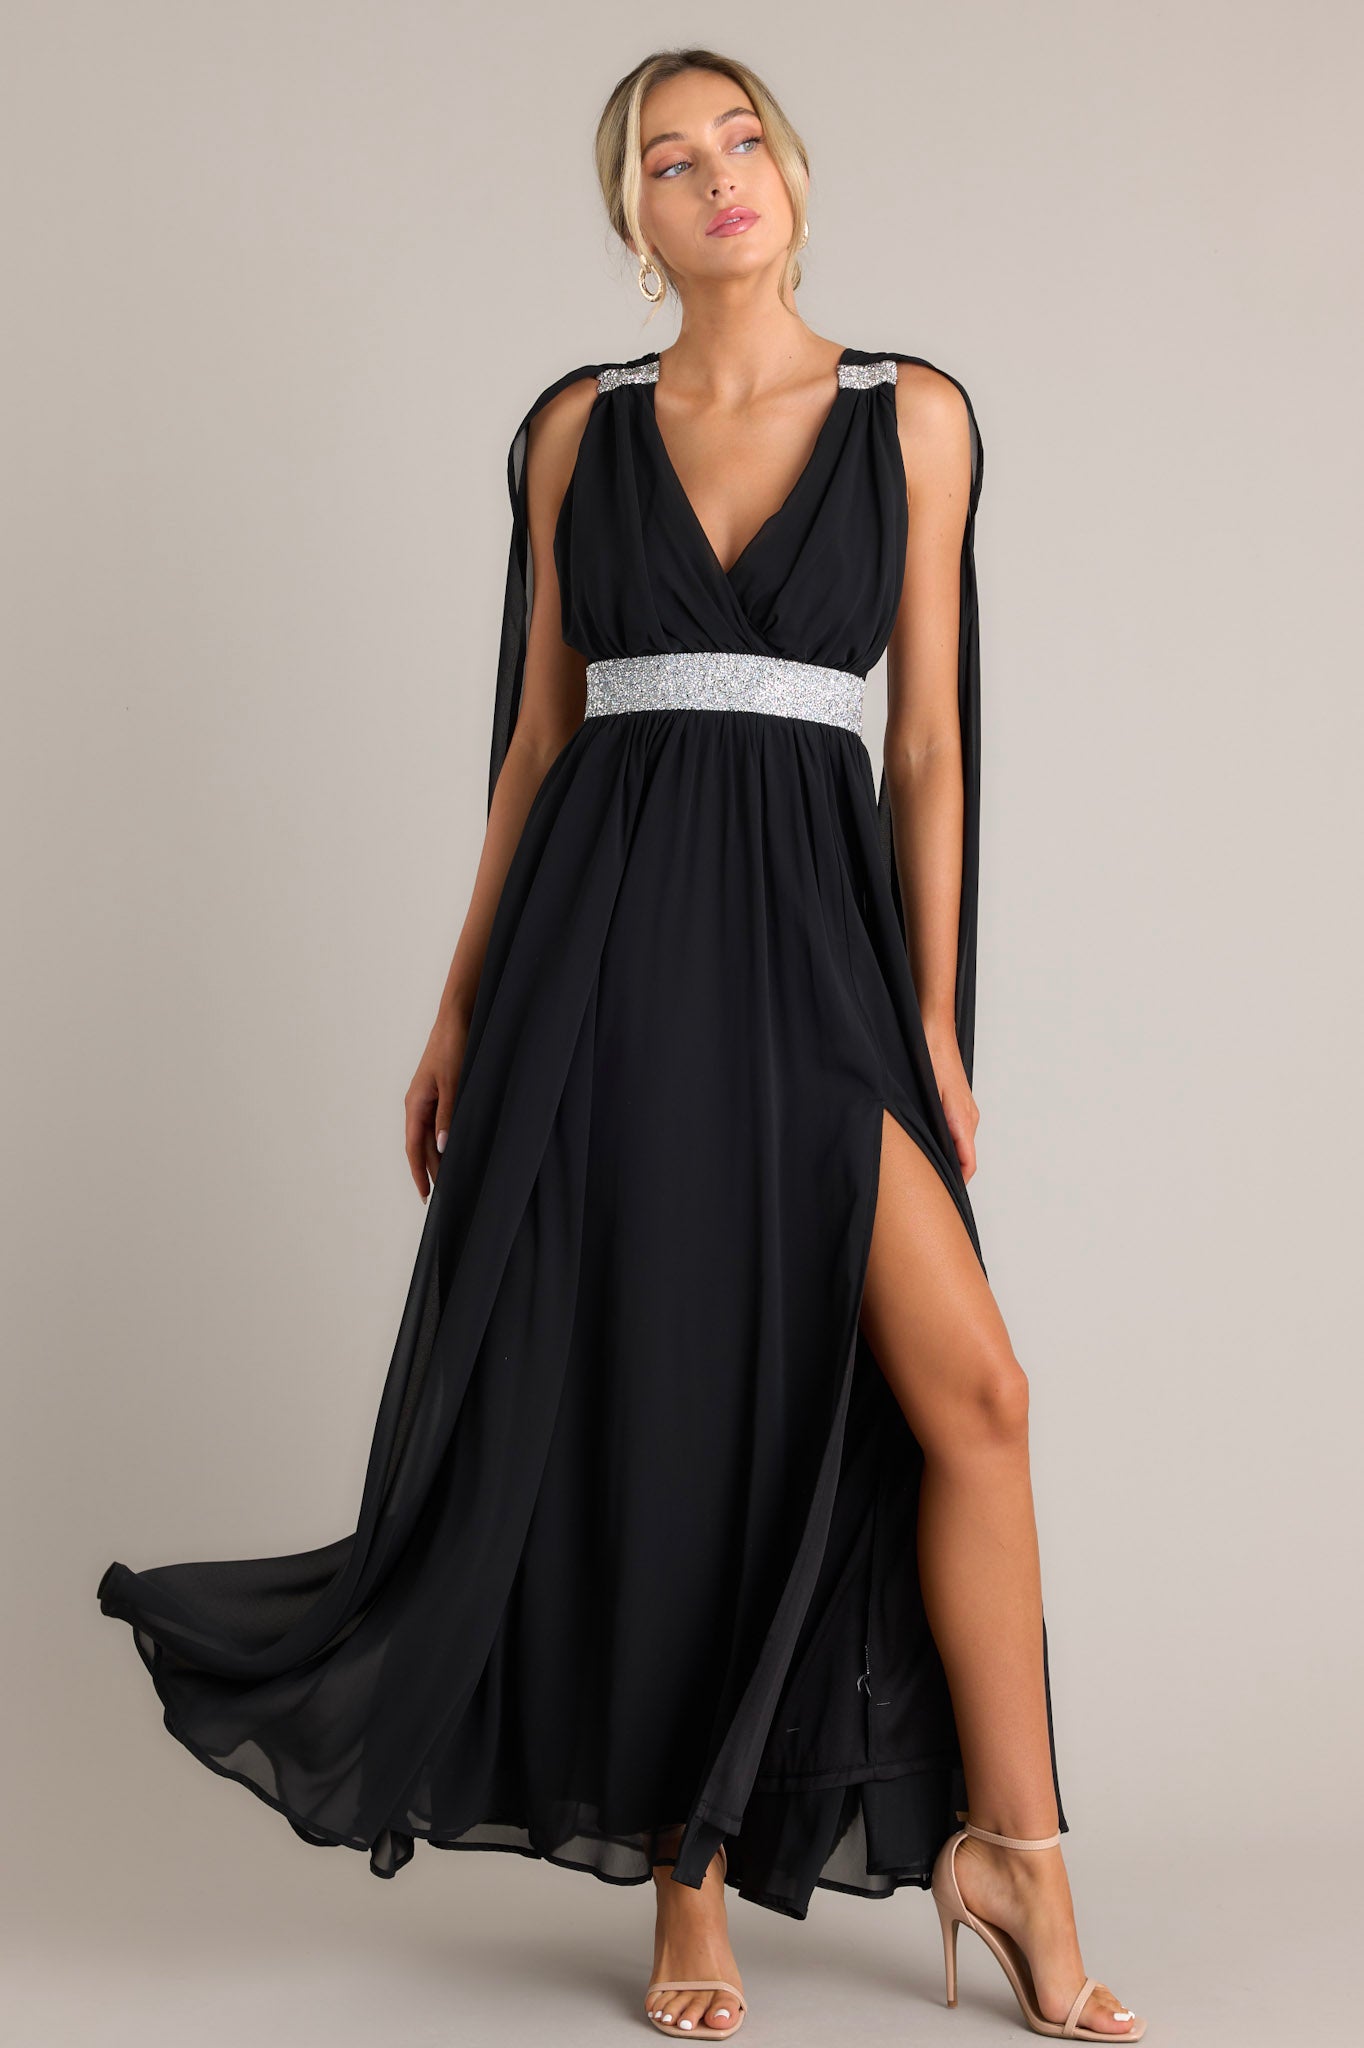 This black dress features a v-neckline, adjustable crisscross straps down the back, rhinestone detailing, fabric trailing from the shoulder to the bottom of the dress, and a slit on the left side of the skirt.